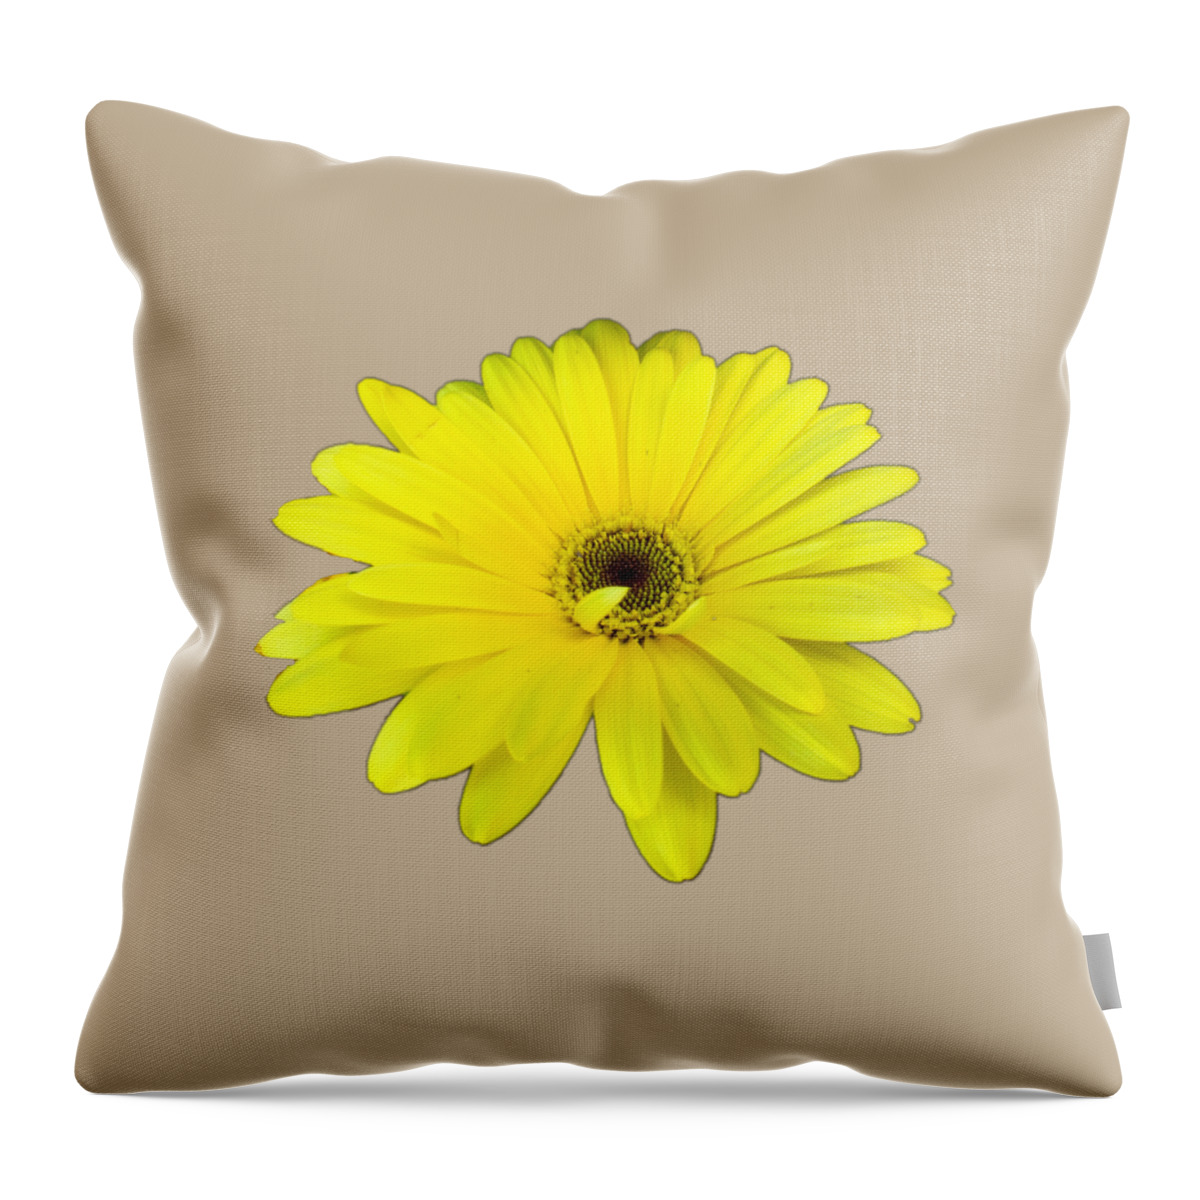 Yellow Throw Pillow featuring the photograph Yellow Daisy Flower by Delynn Addams by Delynn Addams